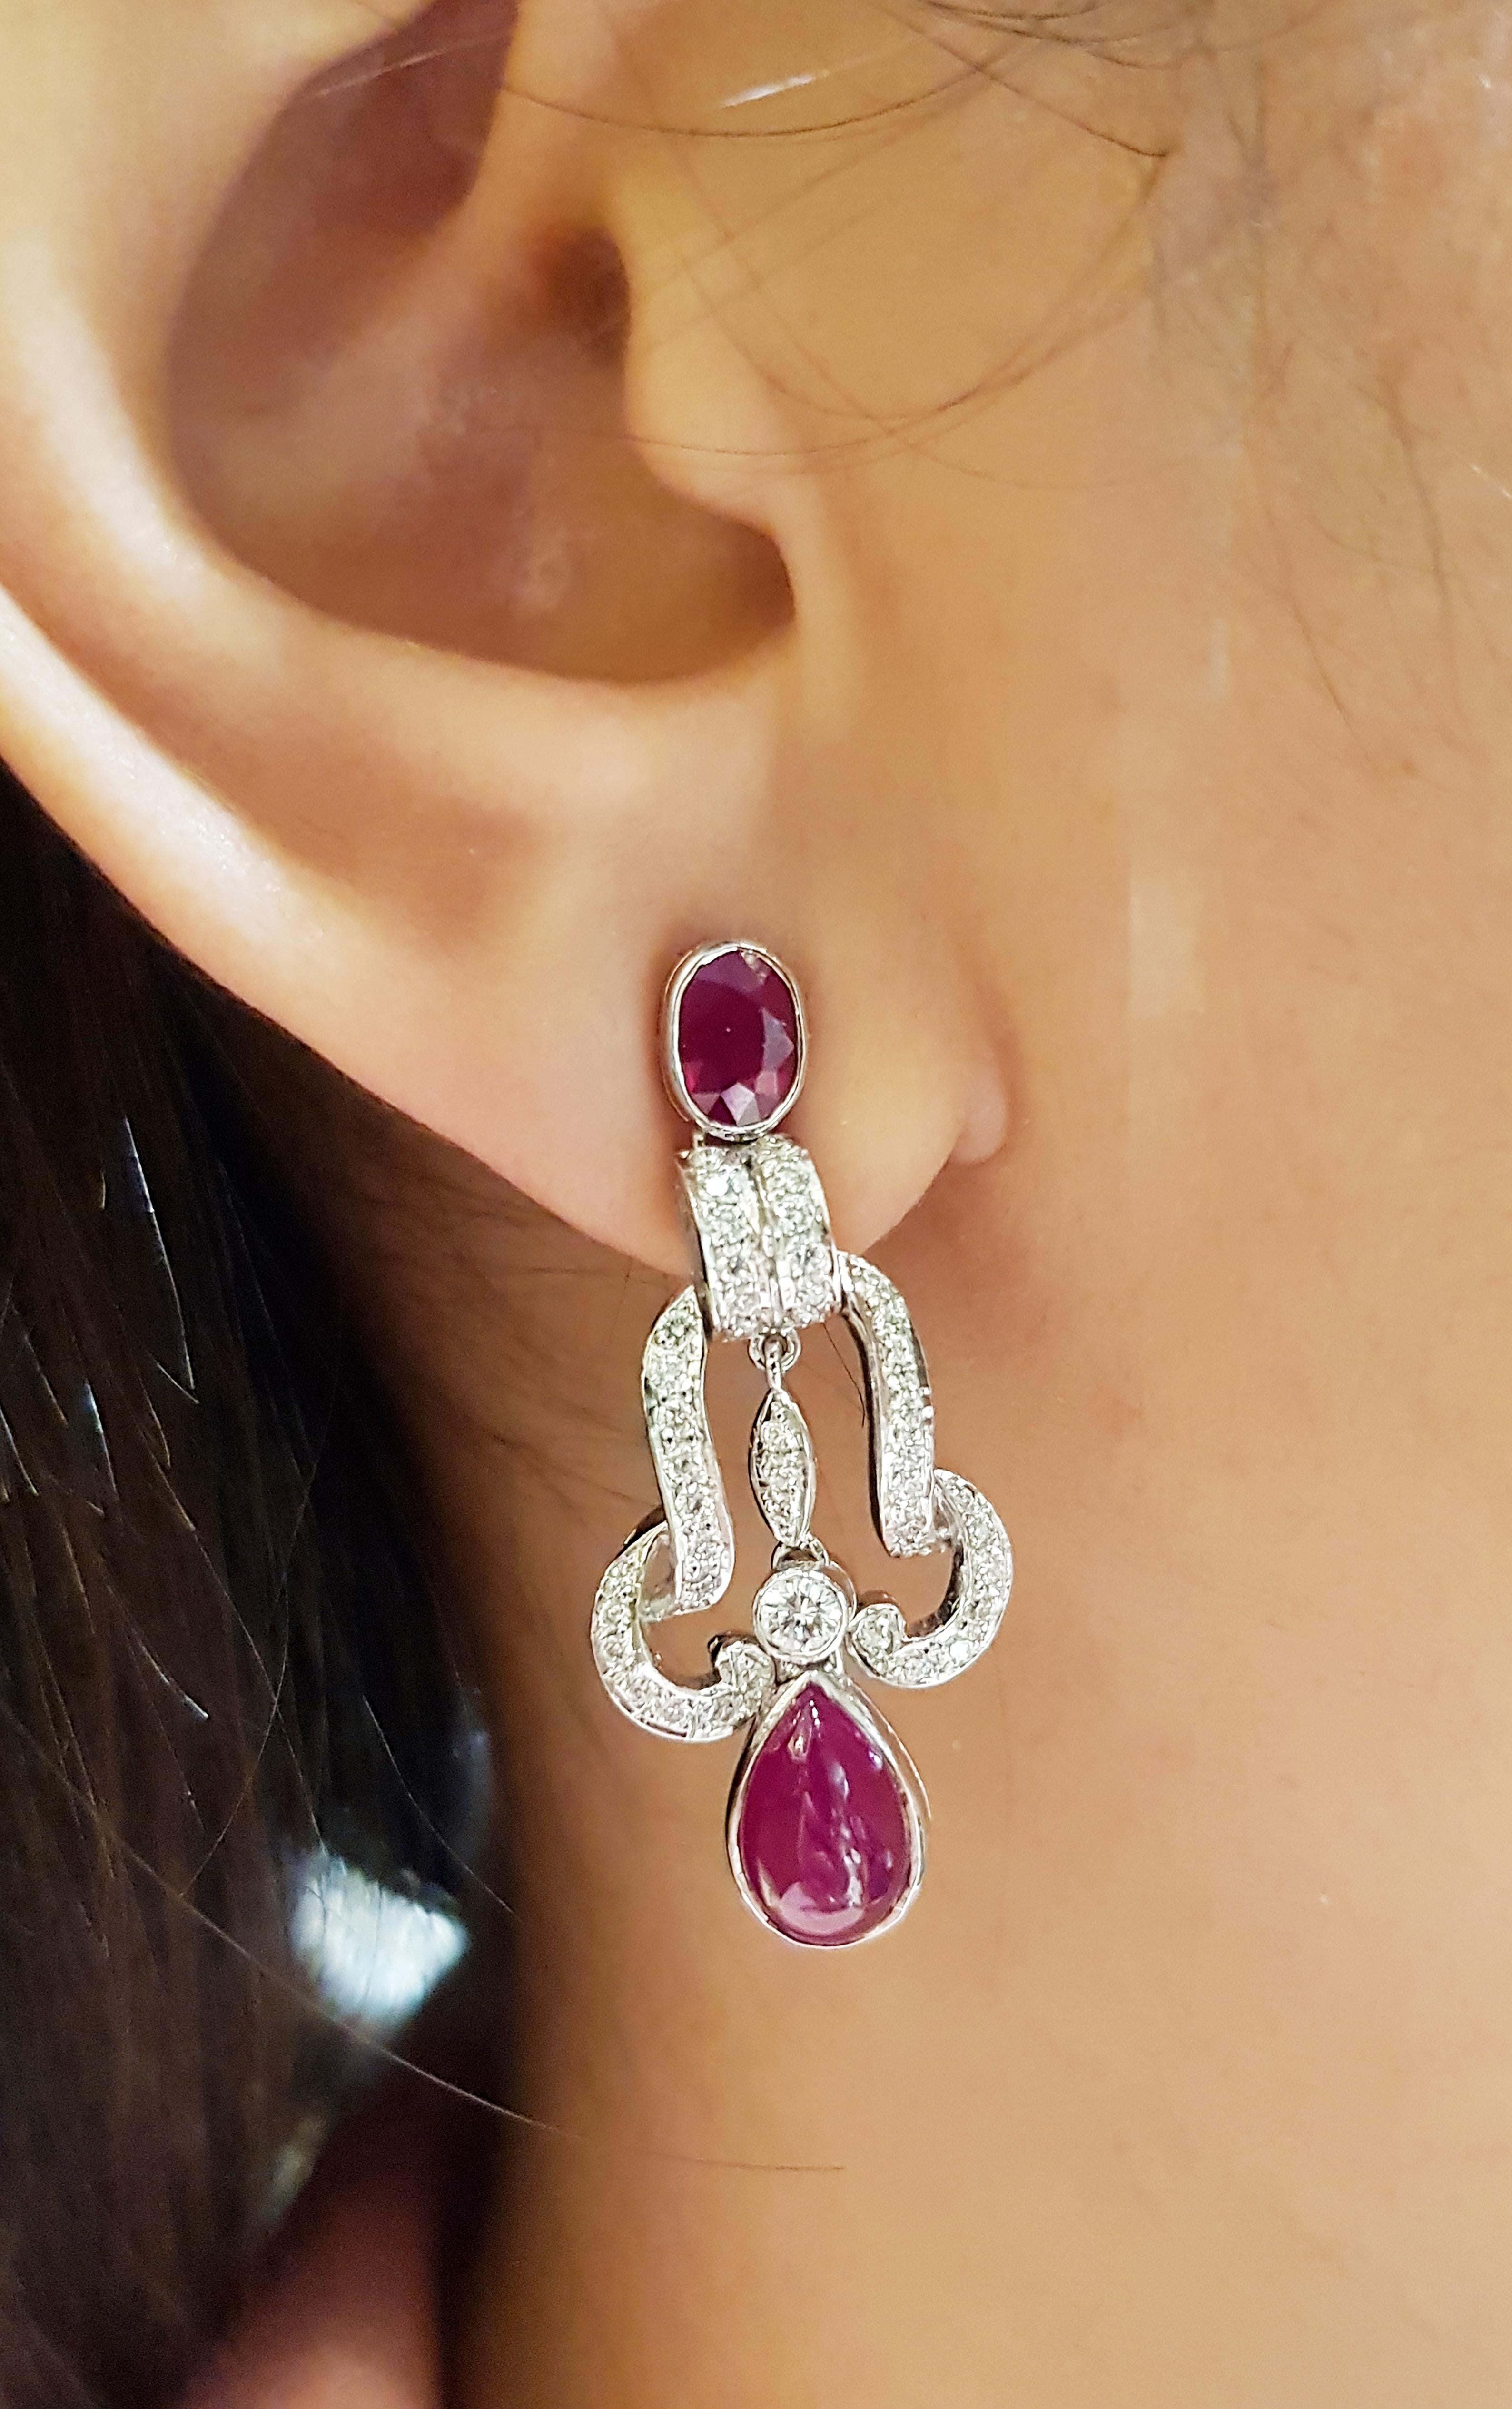 Cabochon Ruby 4.84 carats, Ruby 1.10 carats with Diamond 0.75 carat Earrings set in 18 Karat White Gold Settings

Width:  1.5 cm 
Length: 3.5 cm
Total Weight: 11.87 grams

